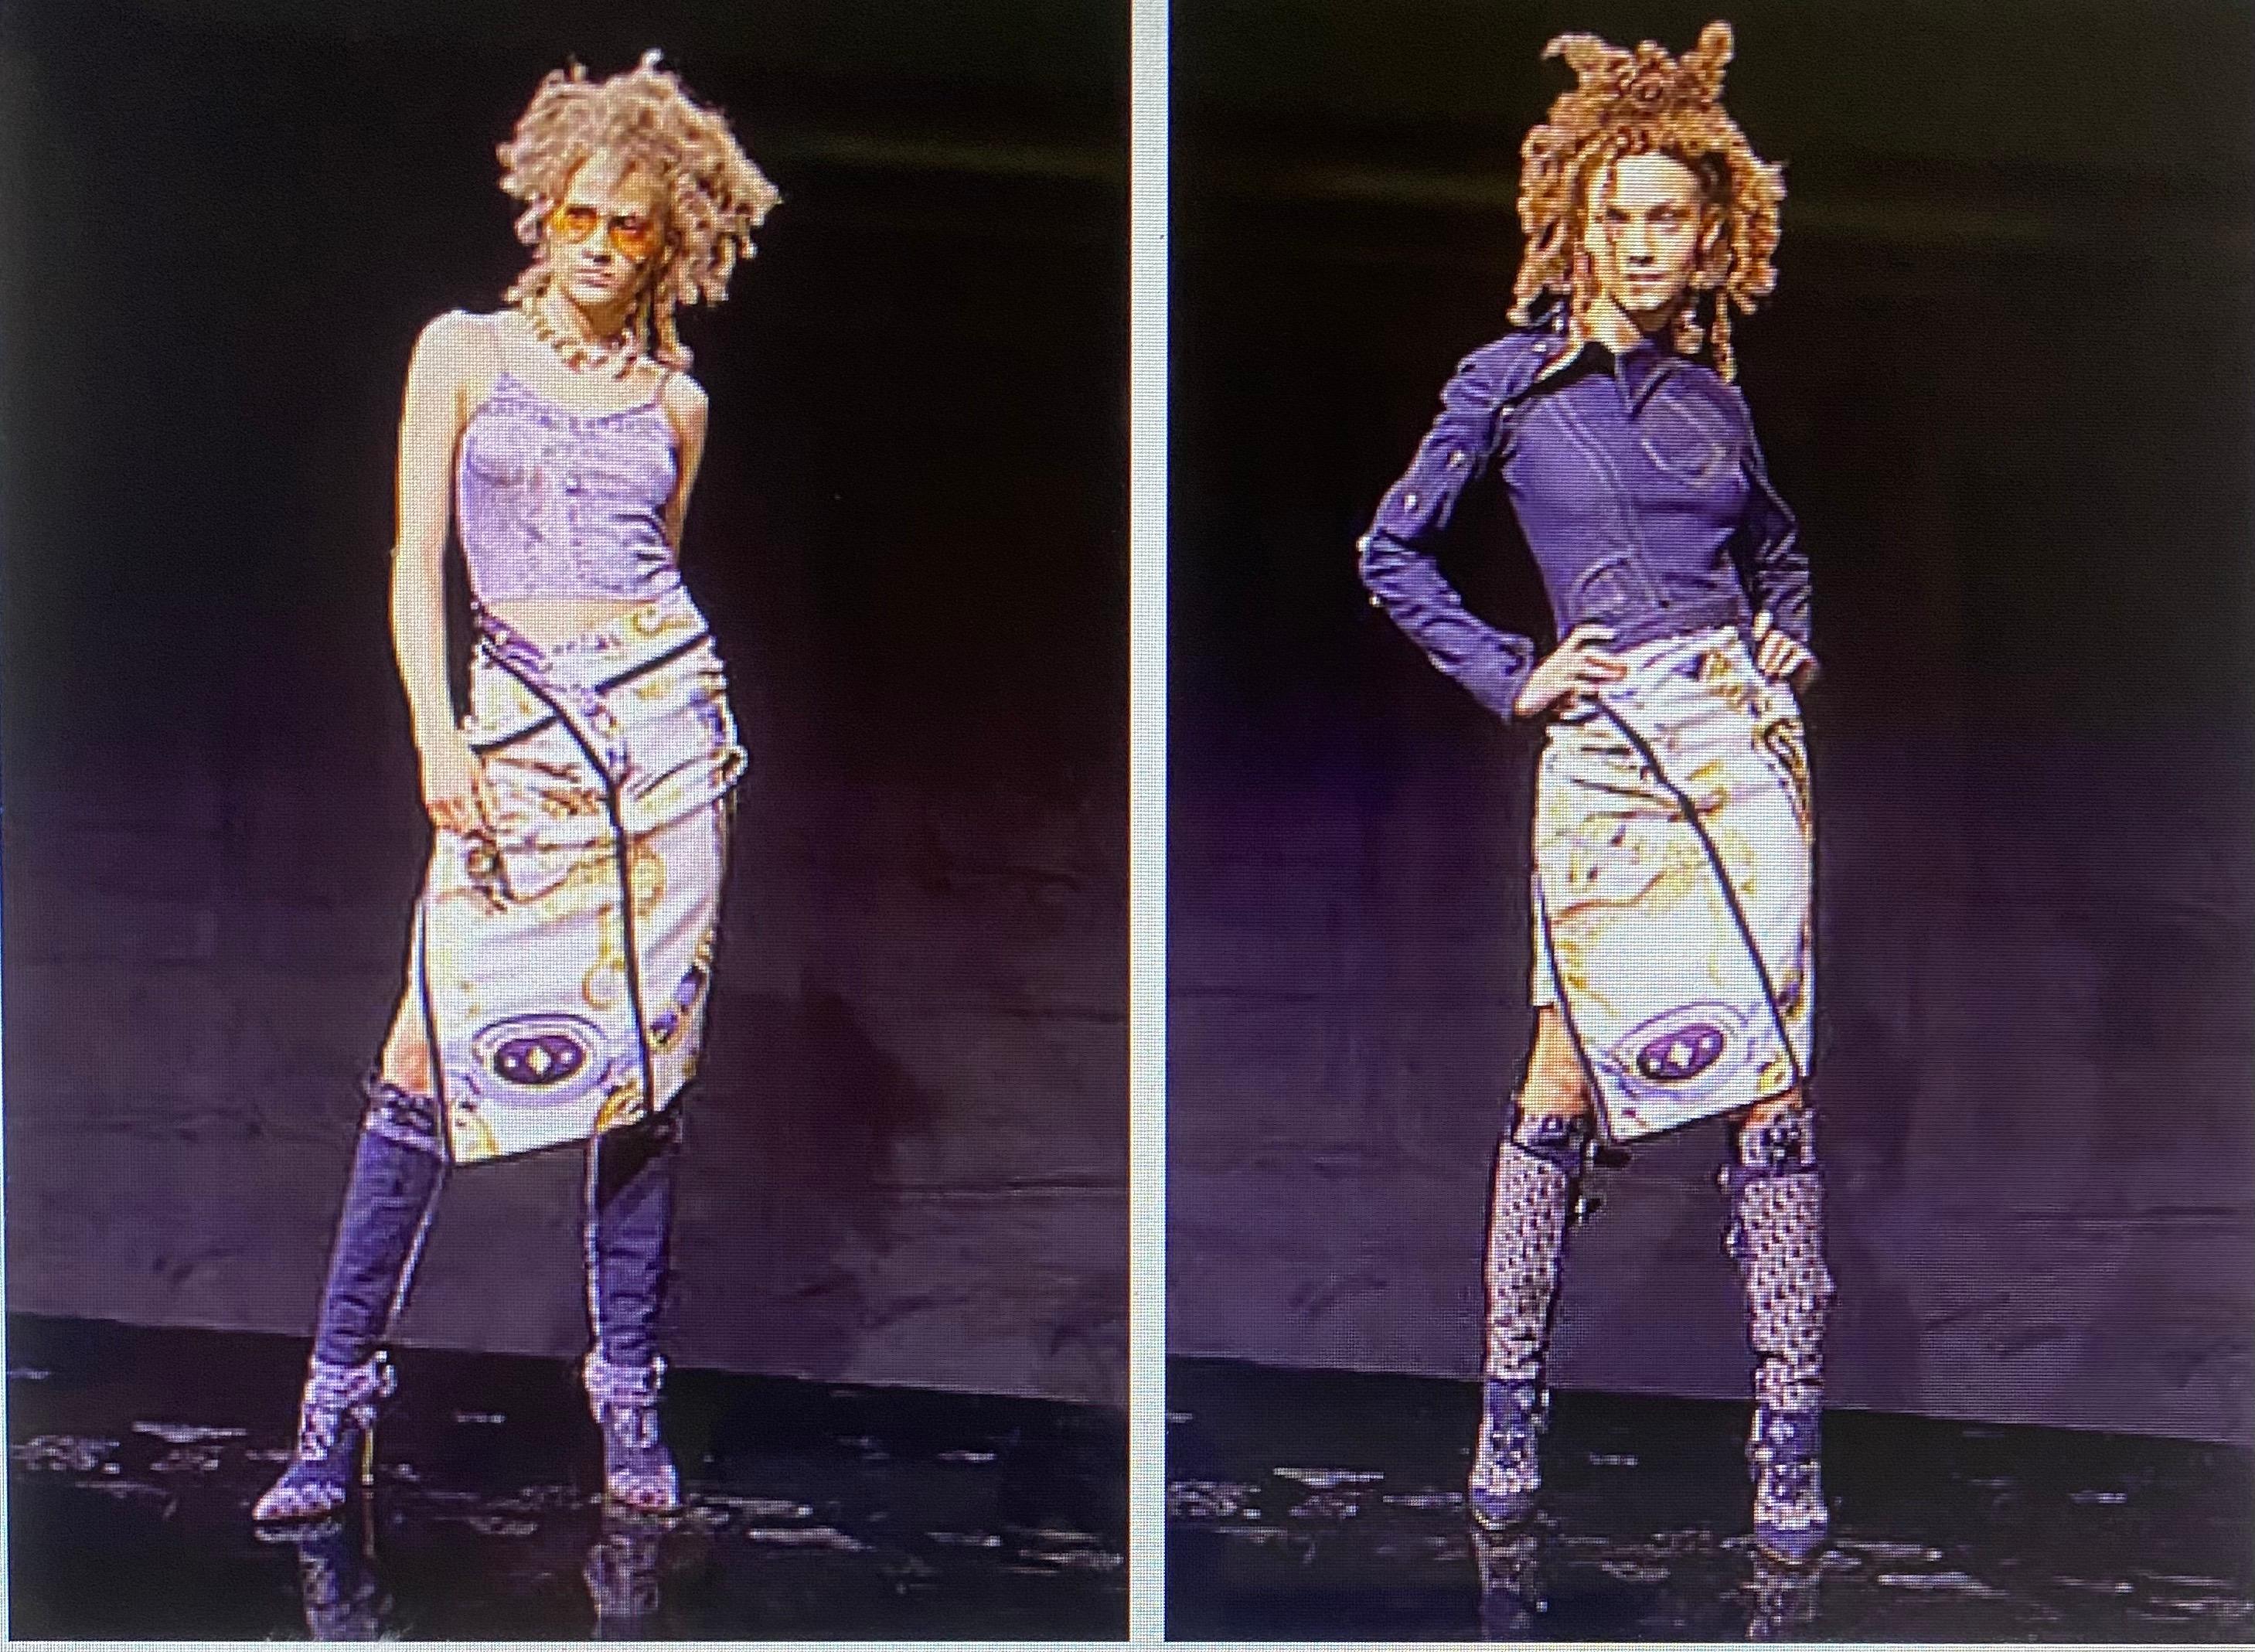 Truly rare piece of history and fashion!

This skirt was selected for the Grand Marnier/ Powerhouse Museum Fashion of the Year 2000 as an excellent example of John Galliano's signature style.

Iconic S/S 2000 John Galliano for Christian Dior Saddle